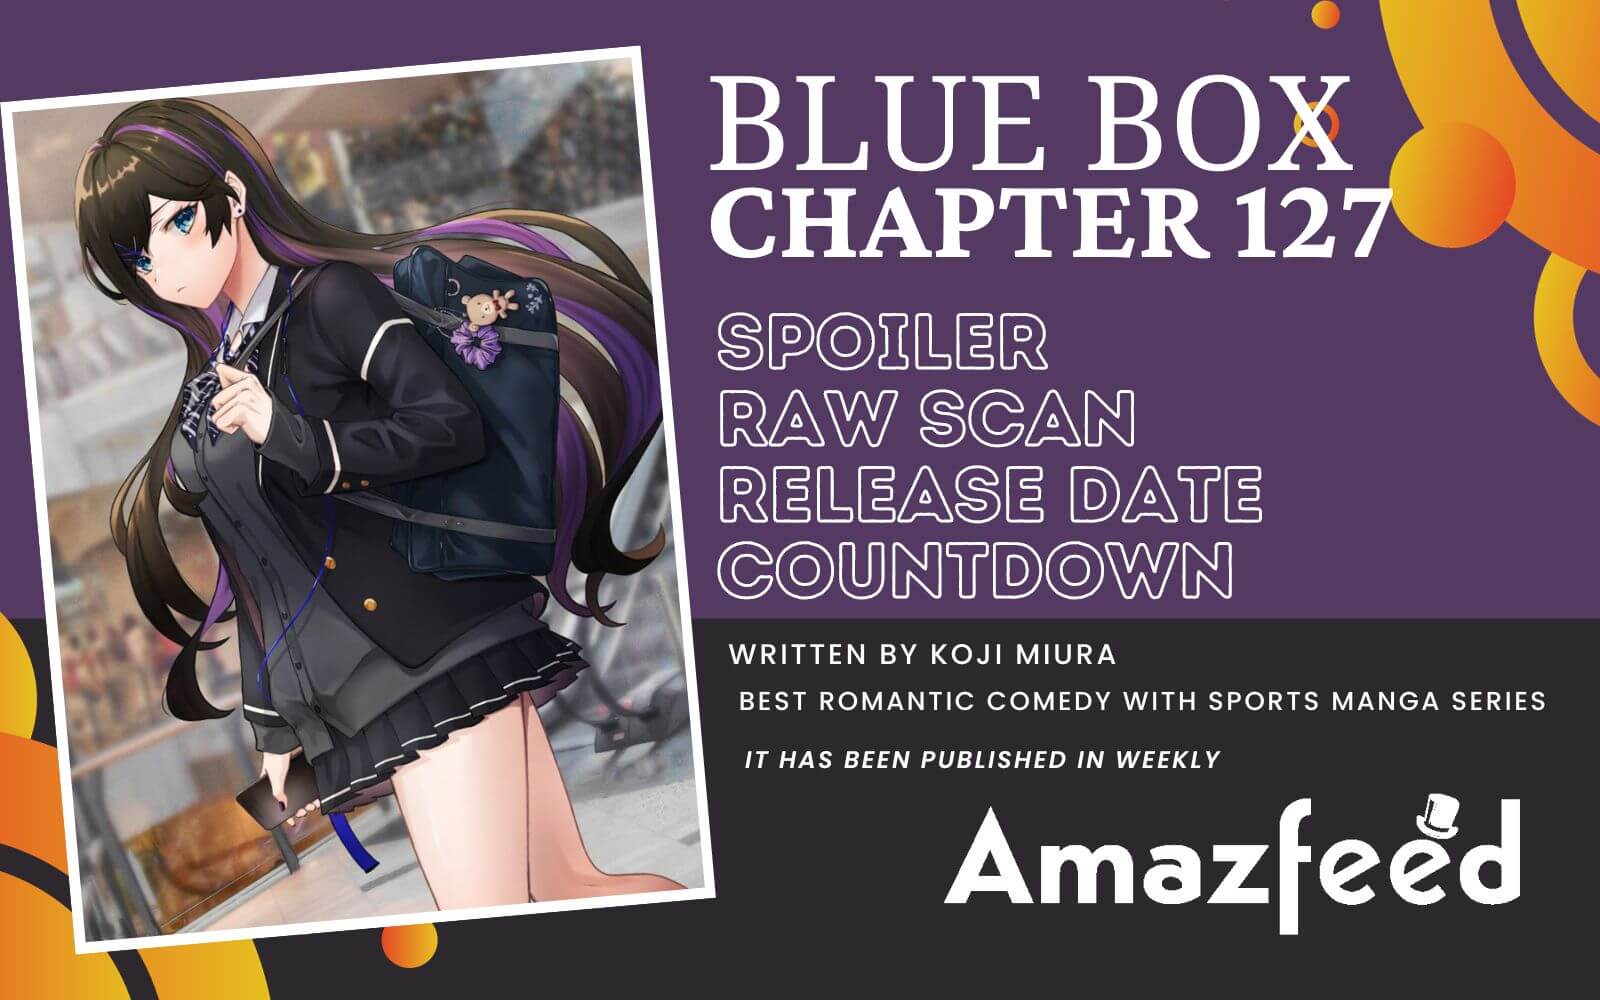 Blue Lock Episode 25 & 26  Release Date, Spoiler, Recap, Trailer,  Characters, Countdown, Where to Watch? & More » Amazfeed